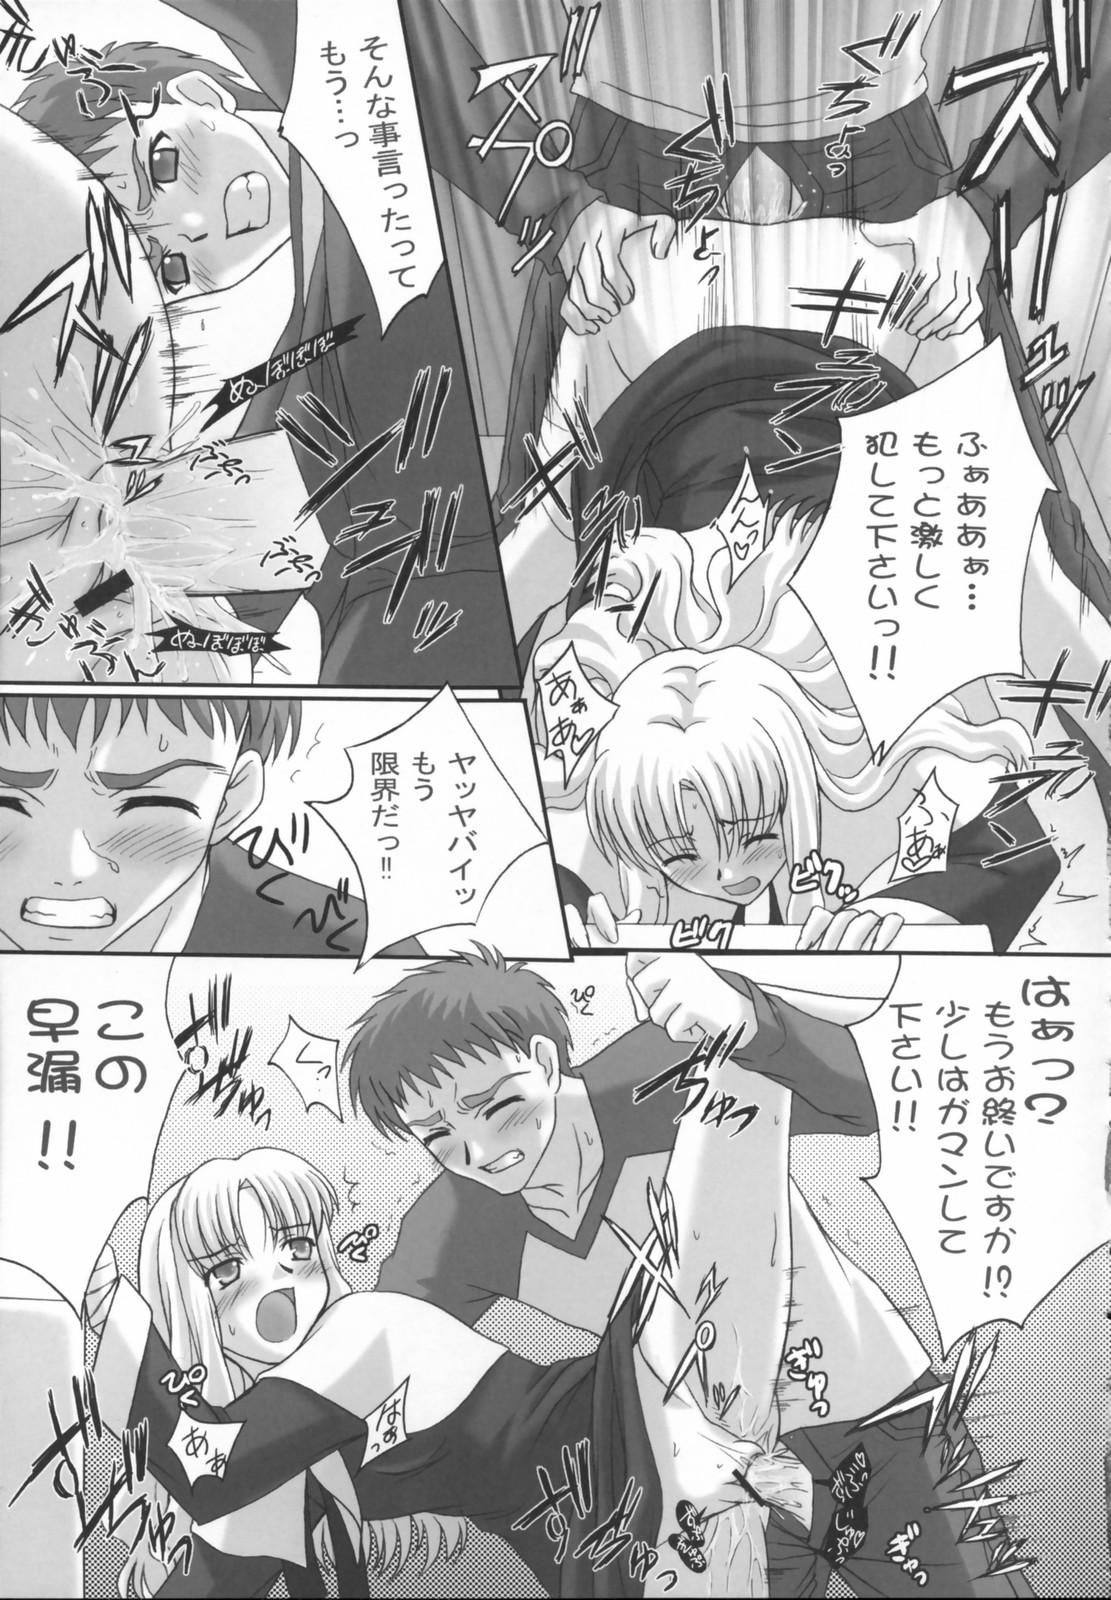 Fuck Madness of sister - Fate hollow ataraxia Stripping - Page 10